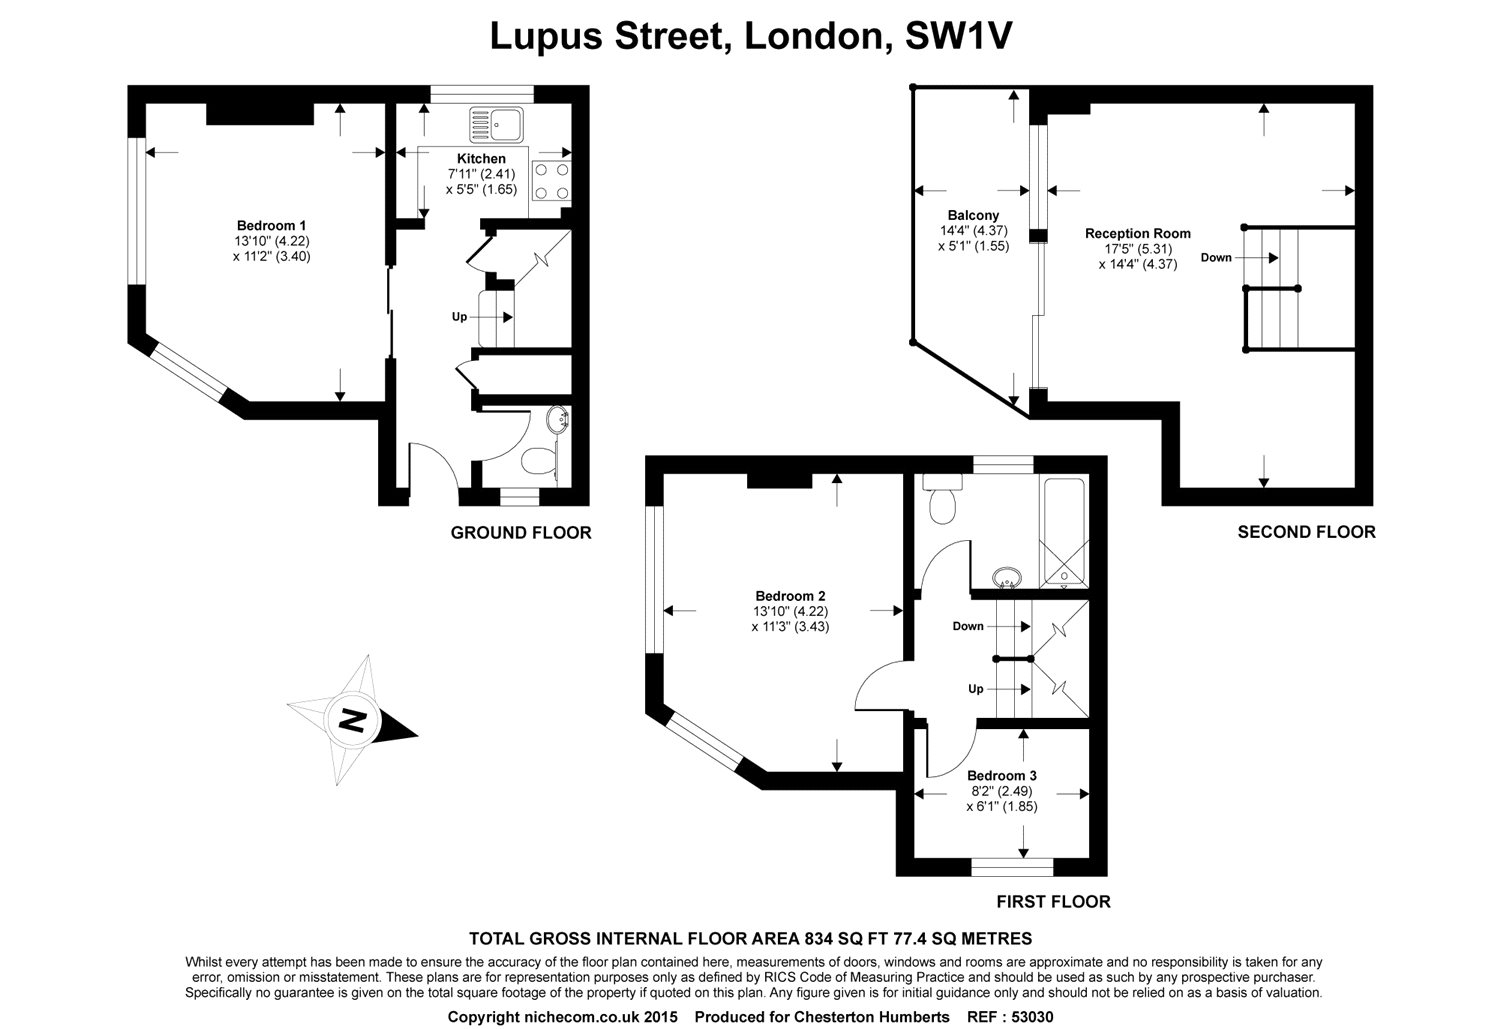 3 Bedrooms  to rent in Lupus Street, Pimlico, London SW1V